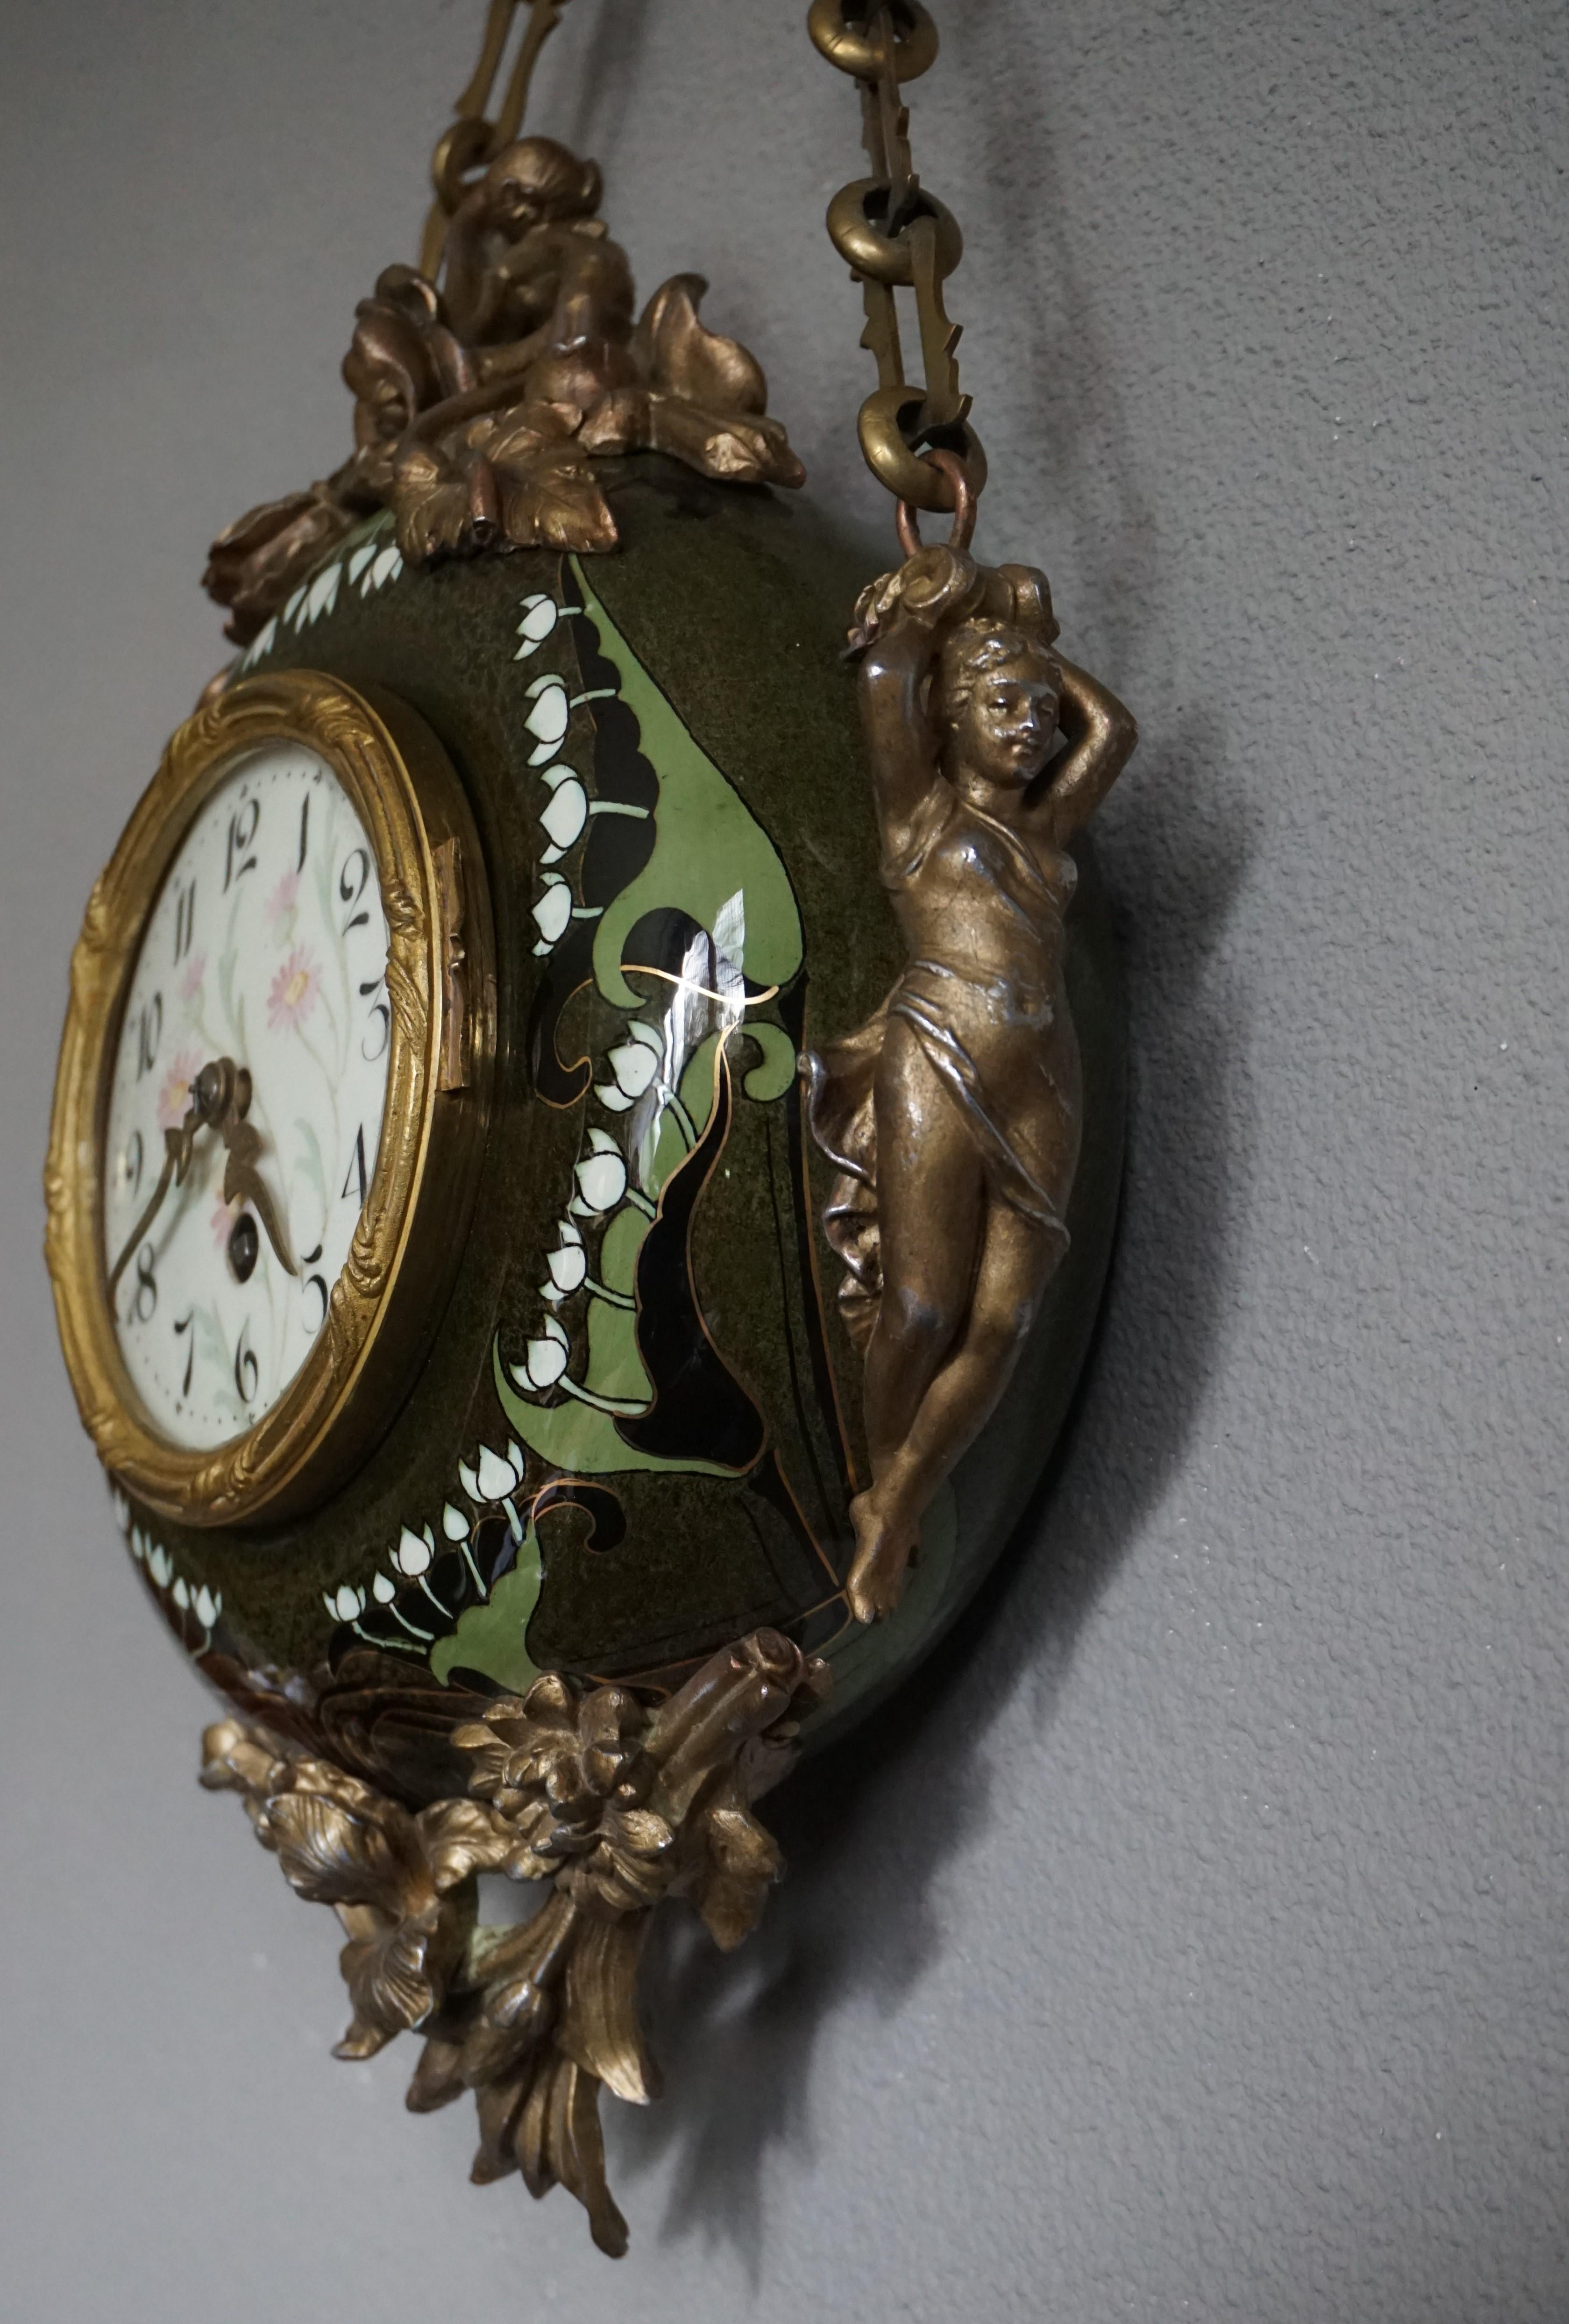 Hand-Painted Antique & Hand Painted Arts & Crafts Majolica Wall Clock with Enameled Dial Face